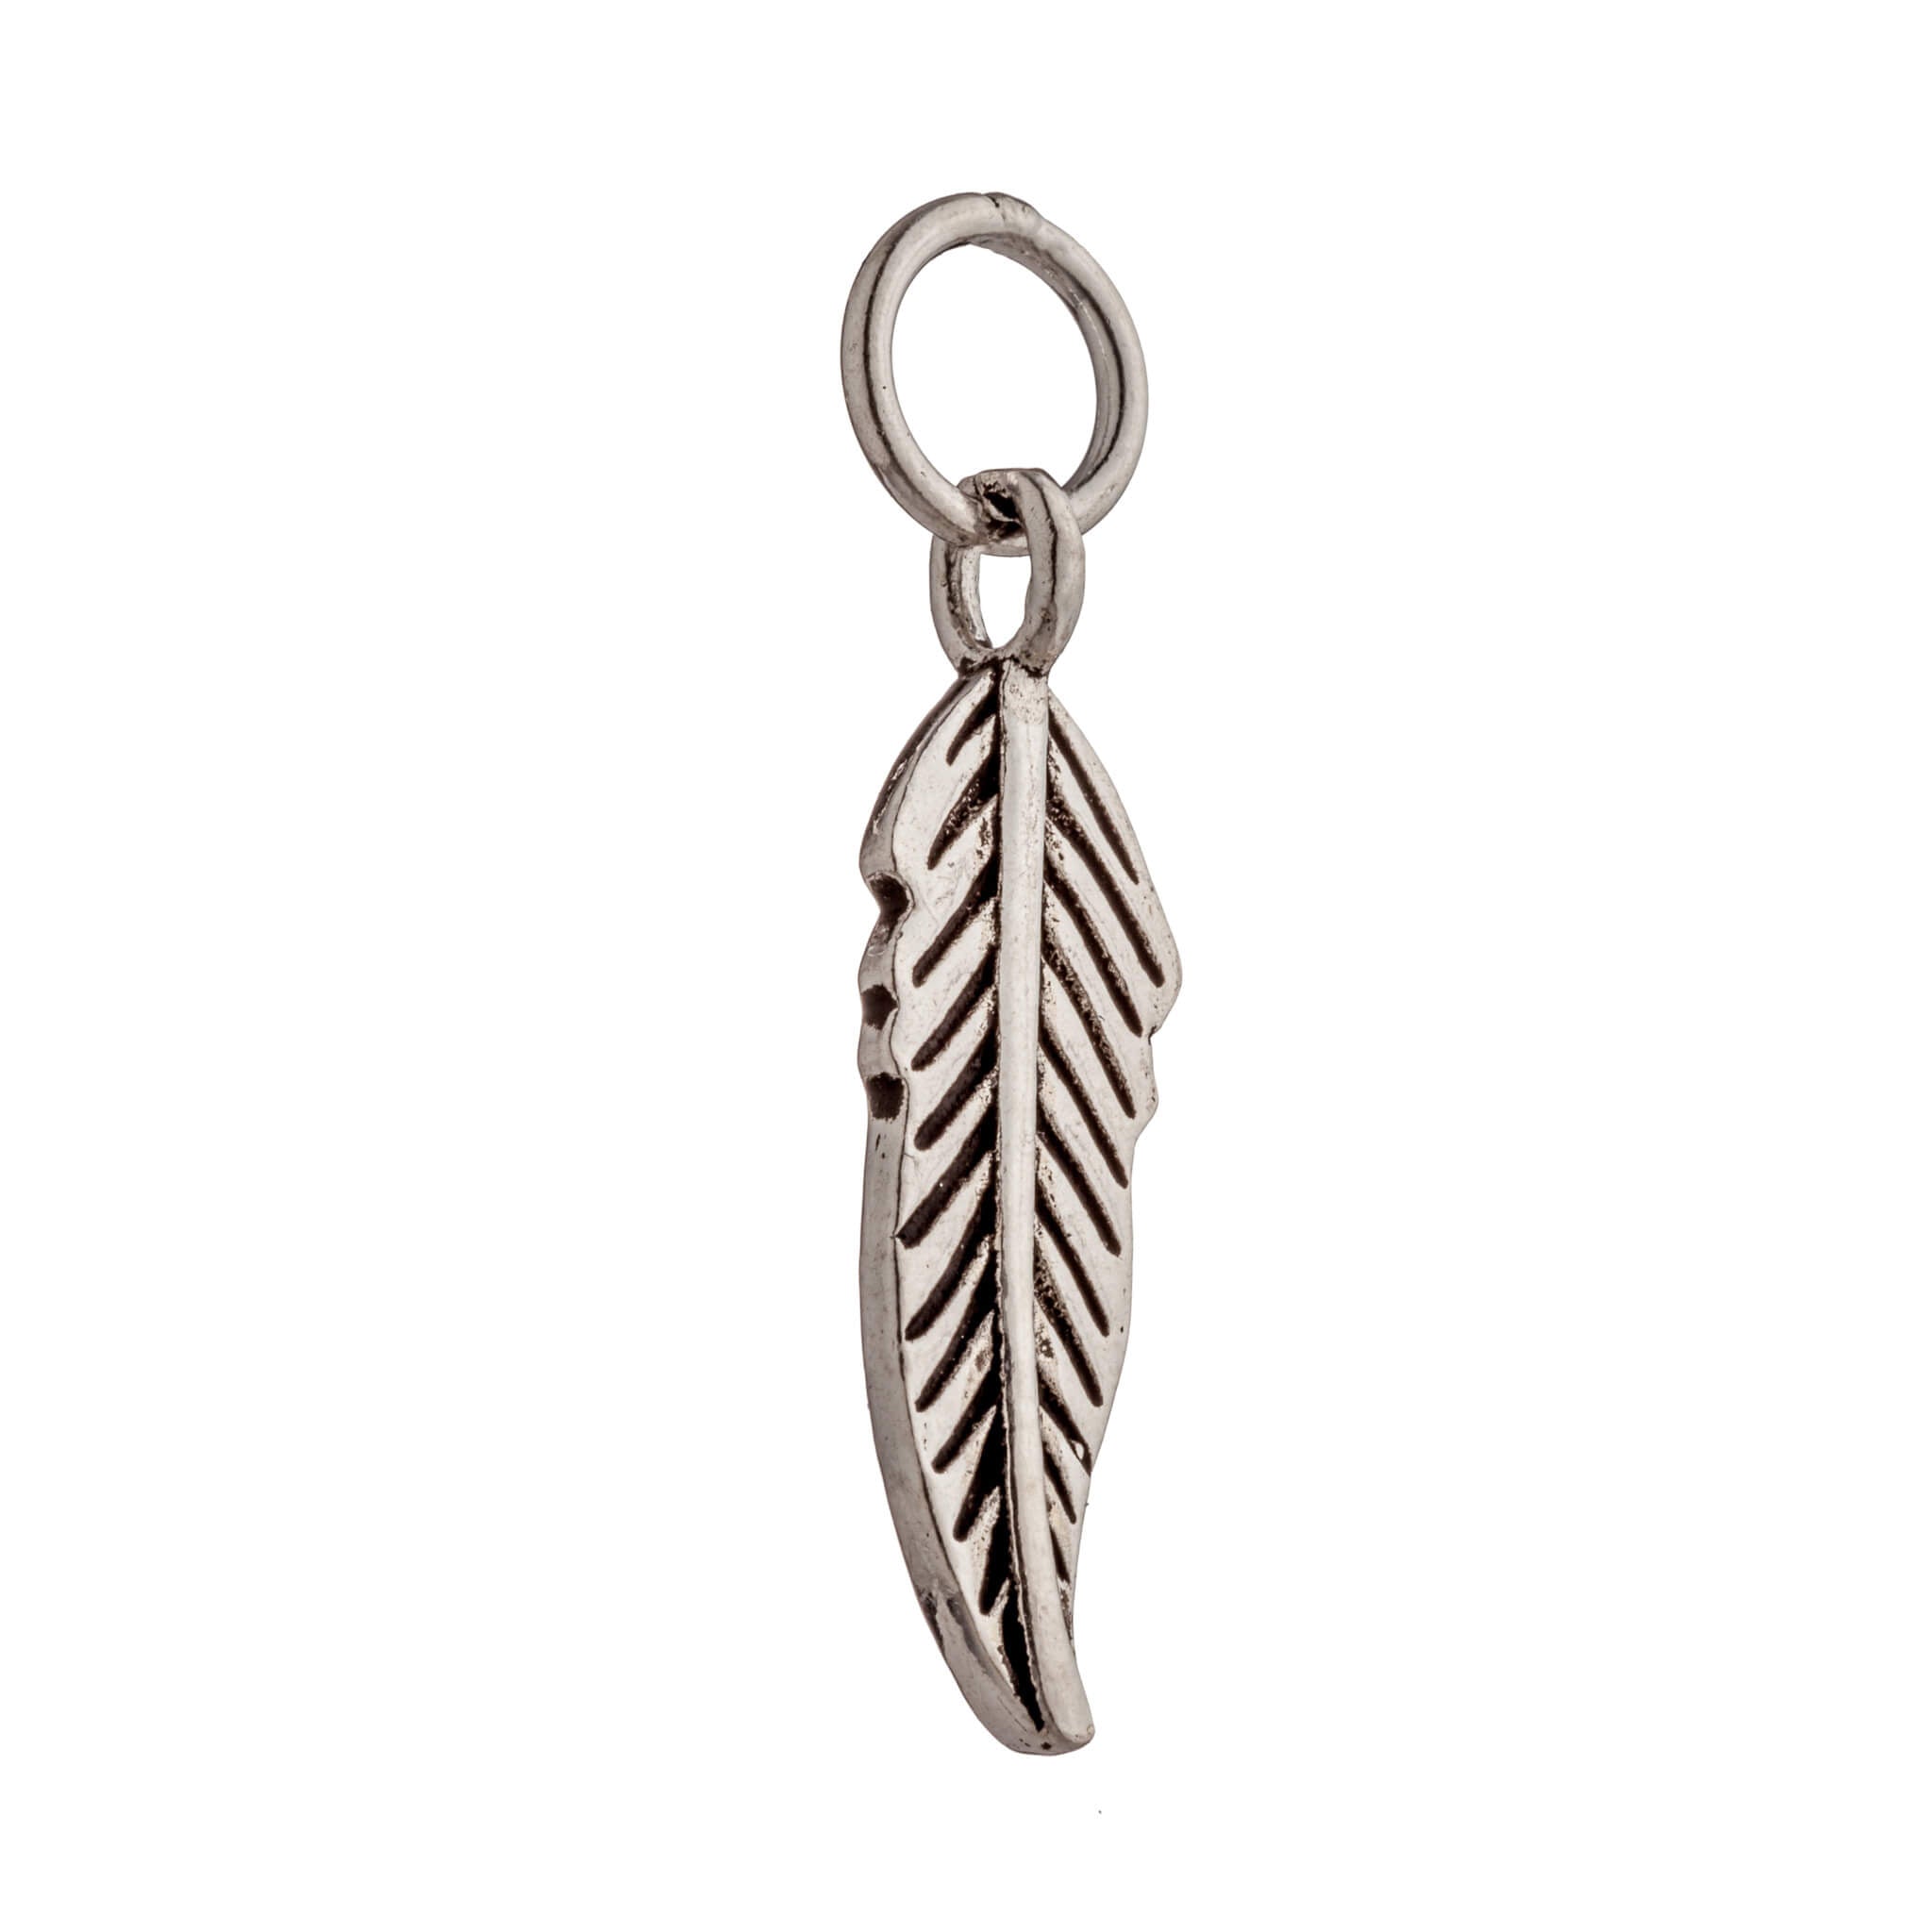 Leaf Charm in Antique Sterling Silver 23.1x6.1x1.2mm